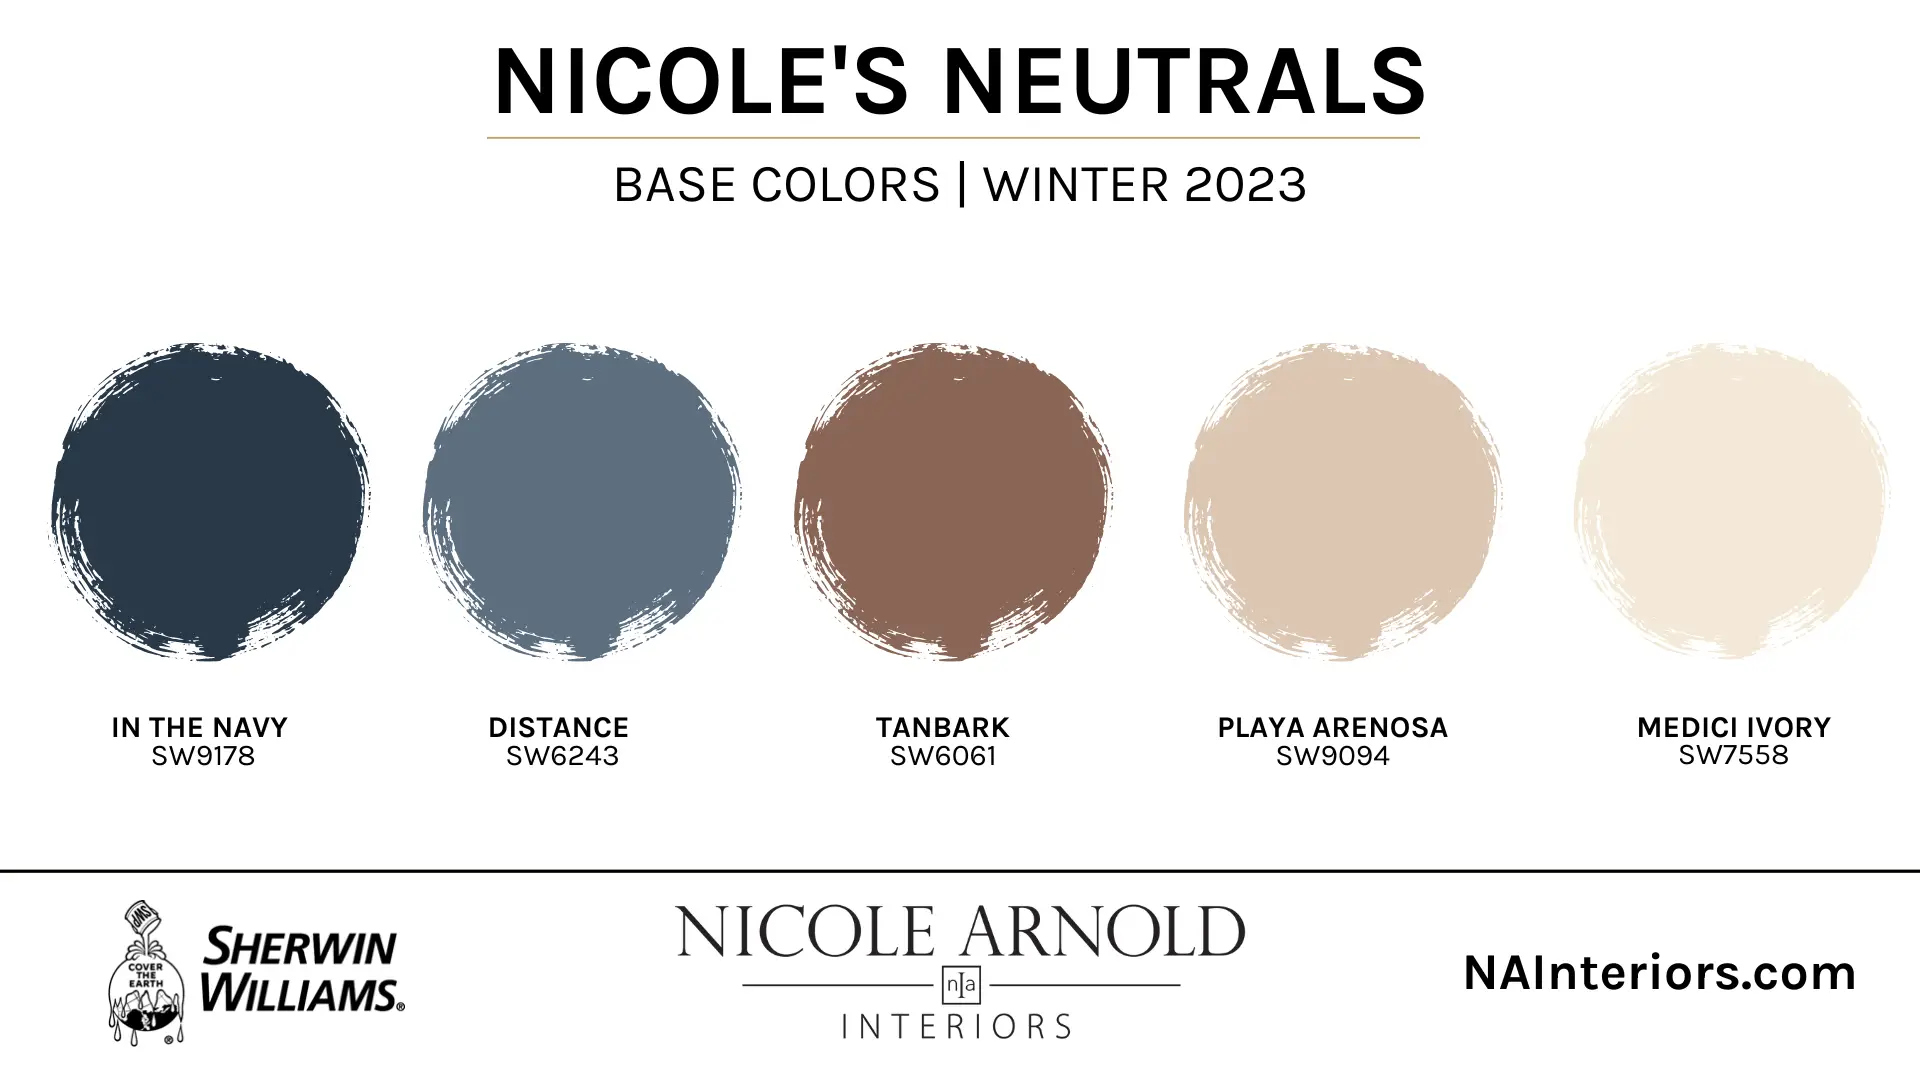 Ways to Incorporate New Color Palettes in Winter | Nicole's Neutrals Winter 2023